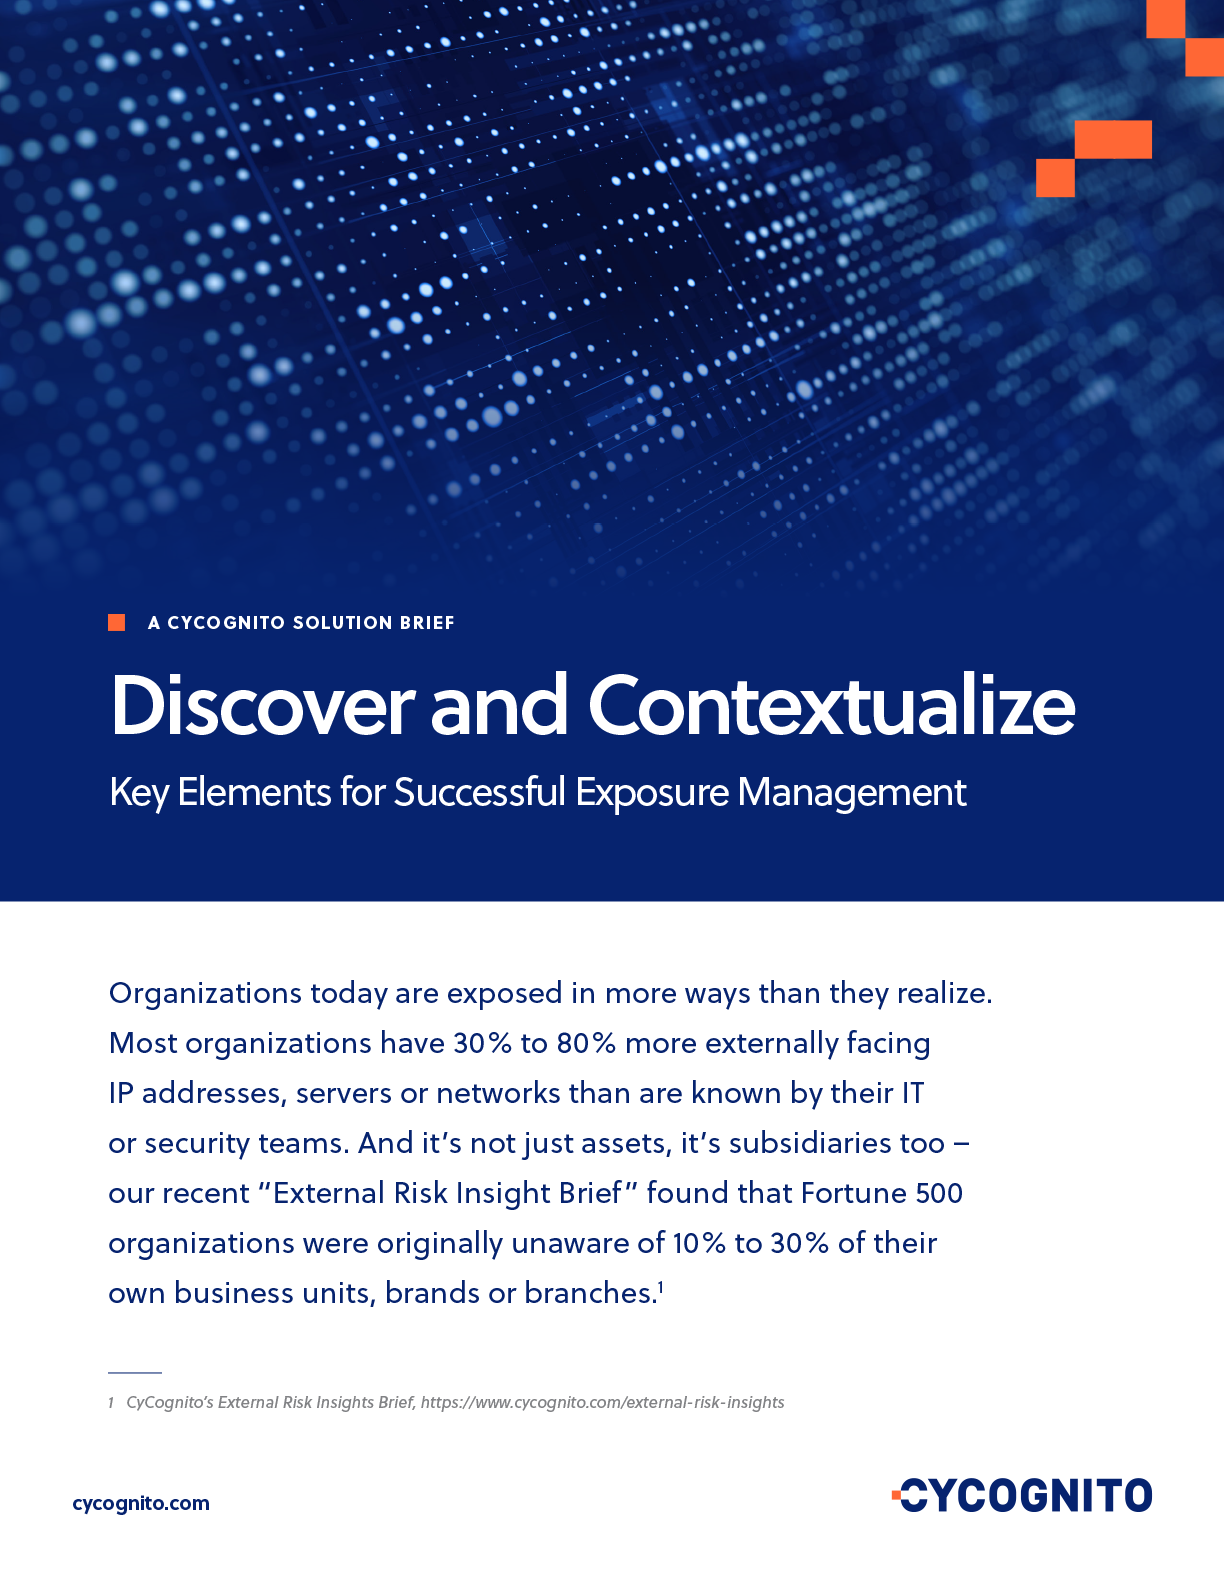 Discover and Contextualize Solution Brief